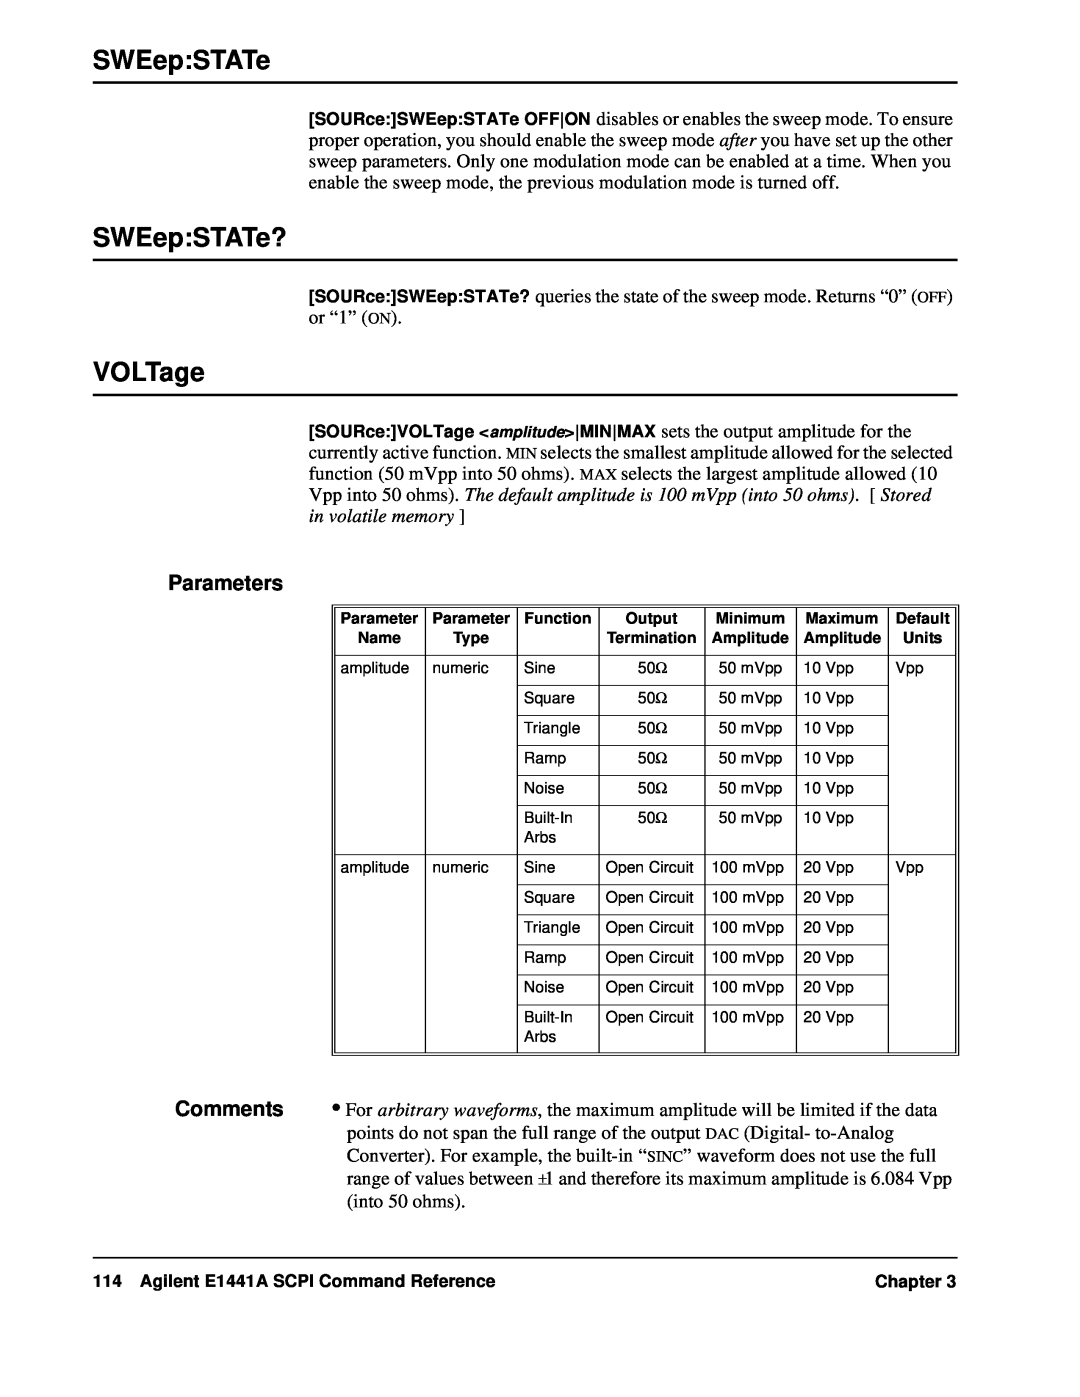 Agilent Technologies user service SWEep:STATe?, VOLTage, Parameters, Agilent E1441A SCPI Command Reference, Chapter 